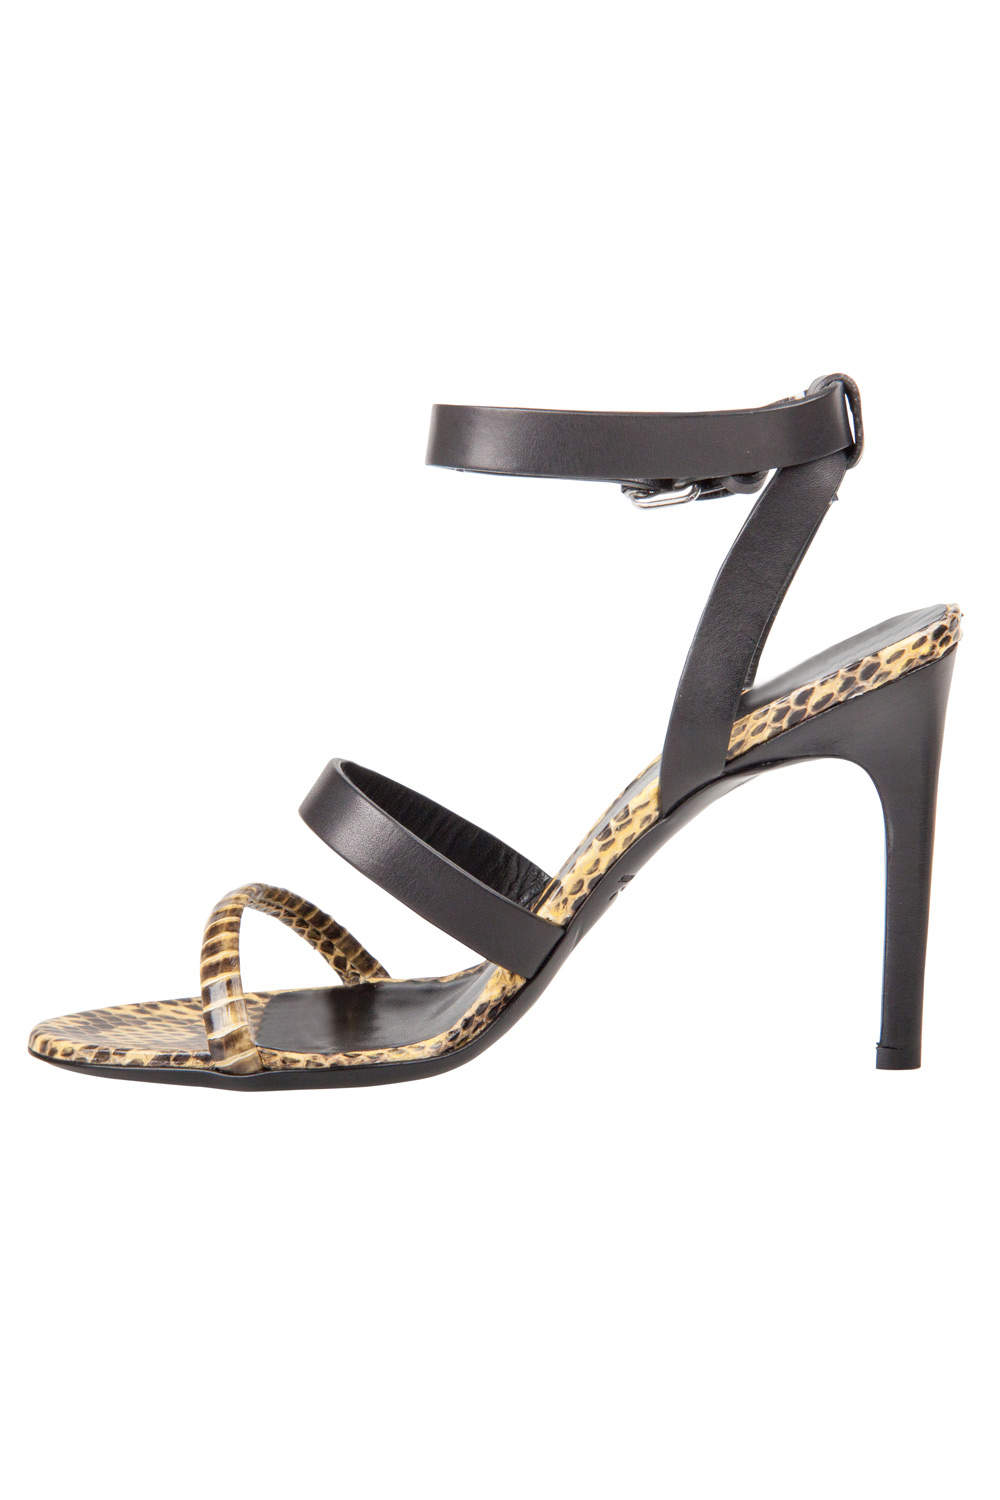 Alexander McQueen Yellow Python And Black Leather Cleo Ankle Strap Sandals Size 37